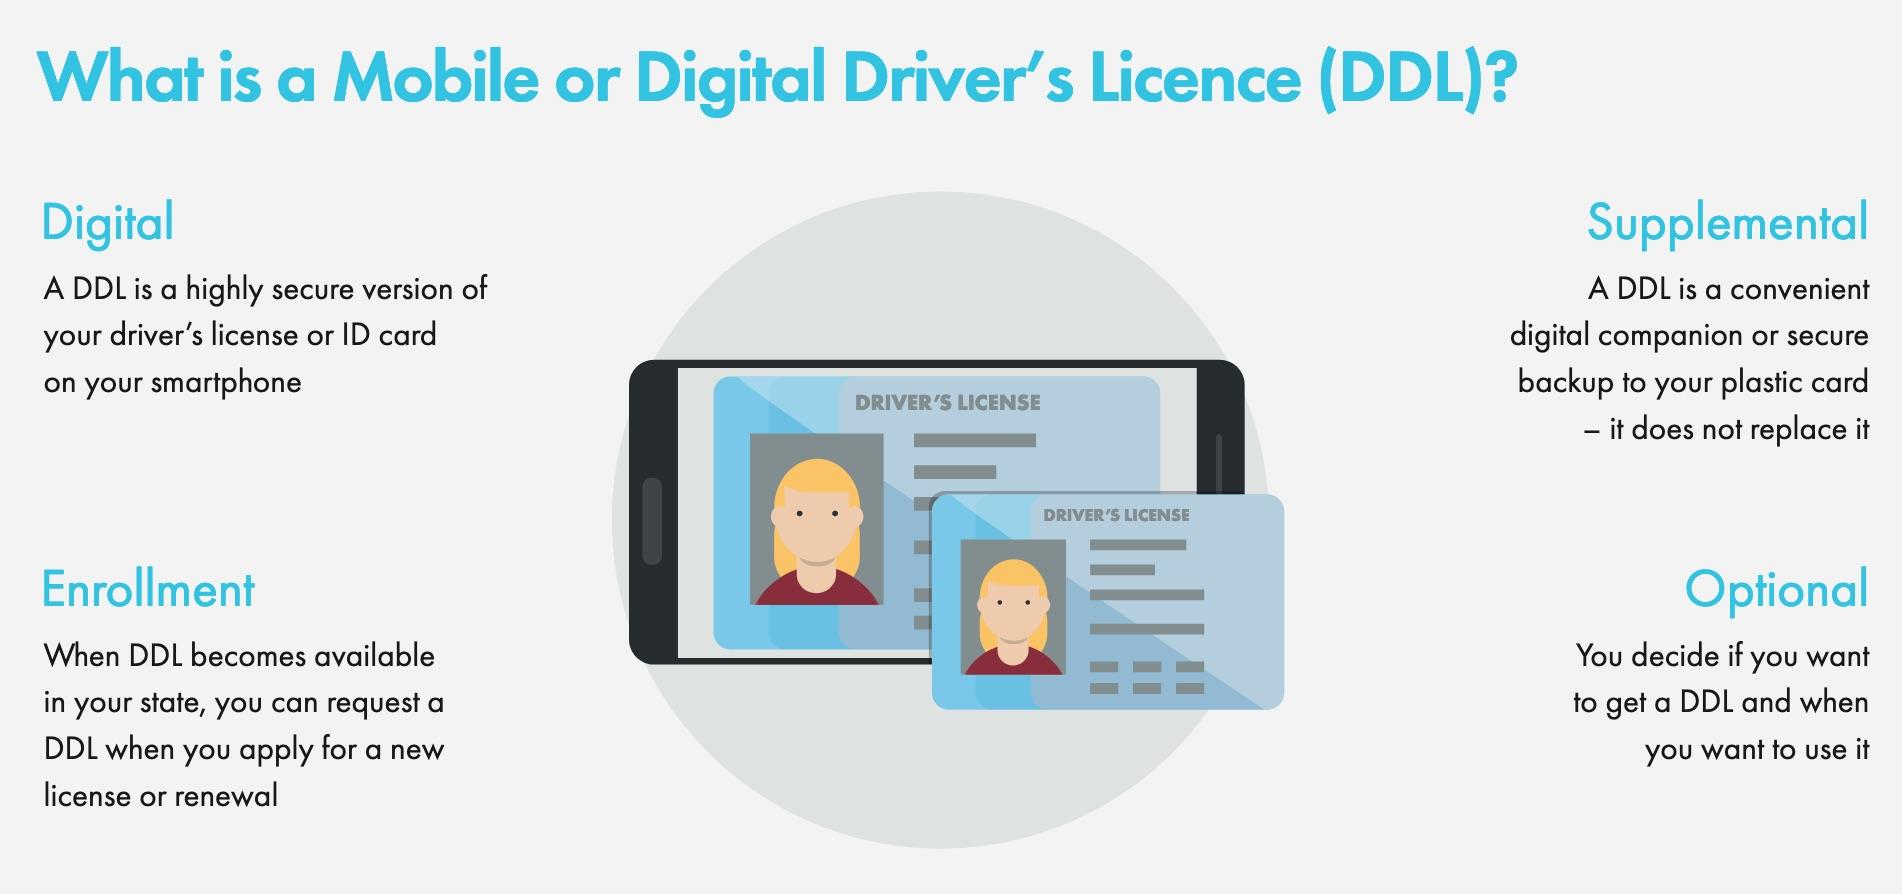 Digital driver's licenses: Are they secure enough for us to trust?